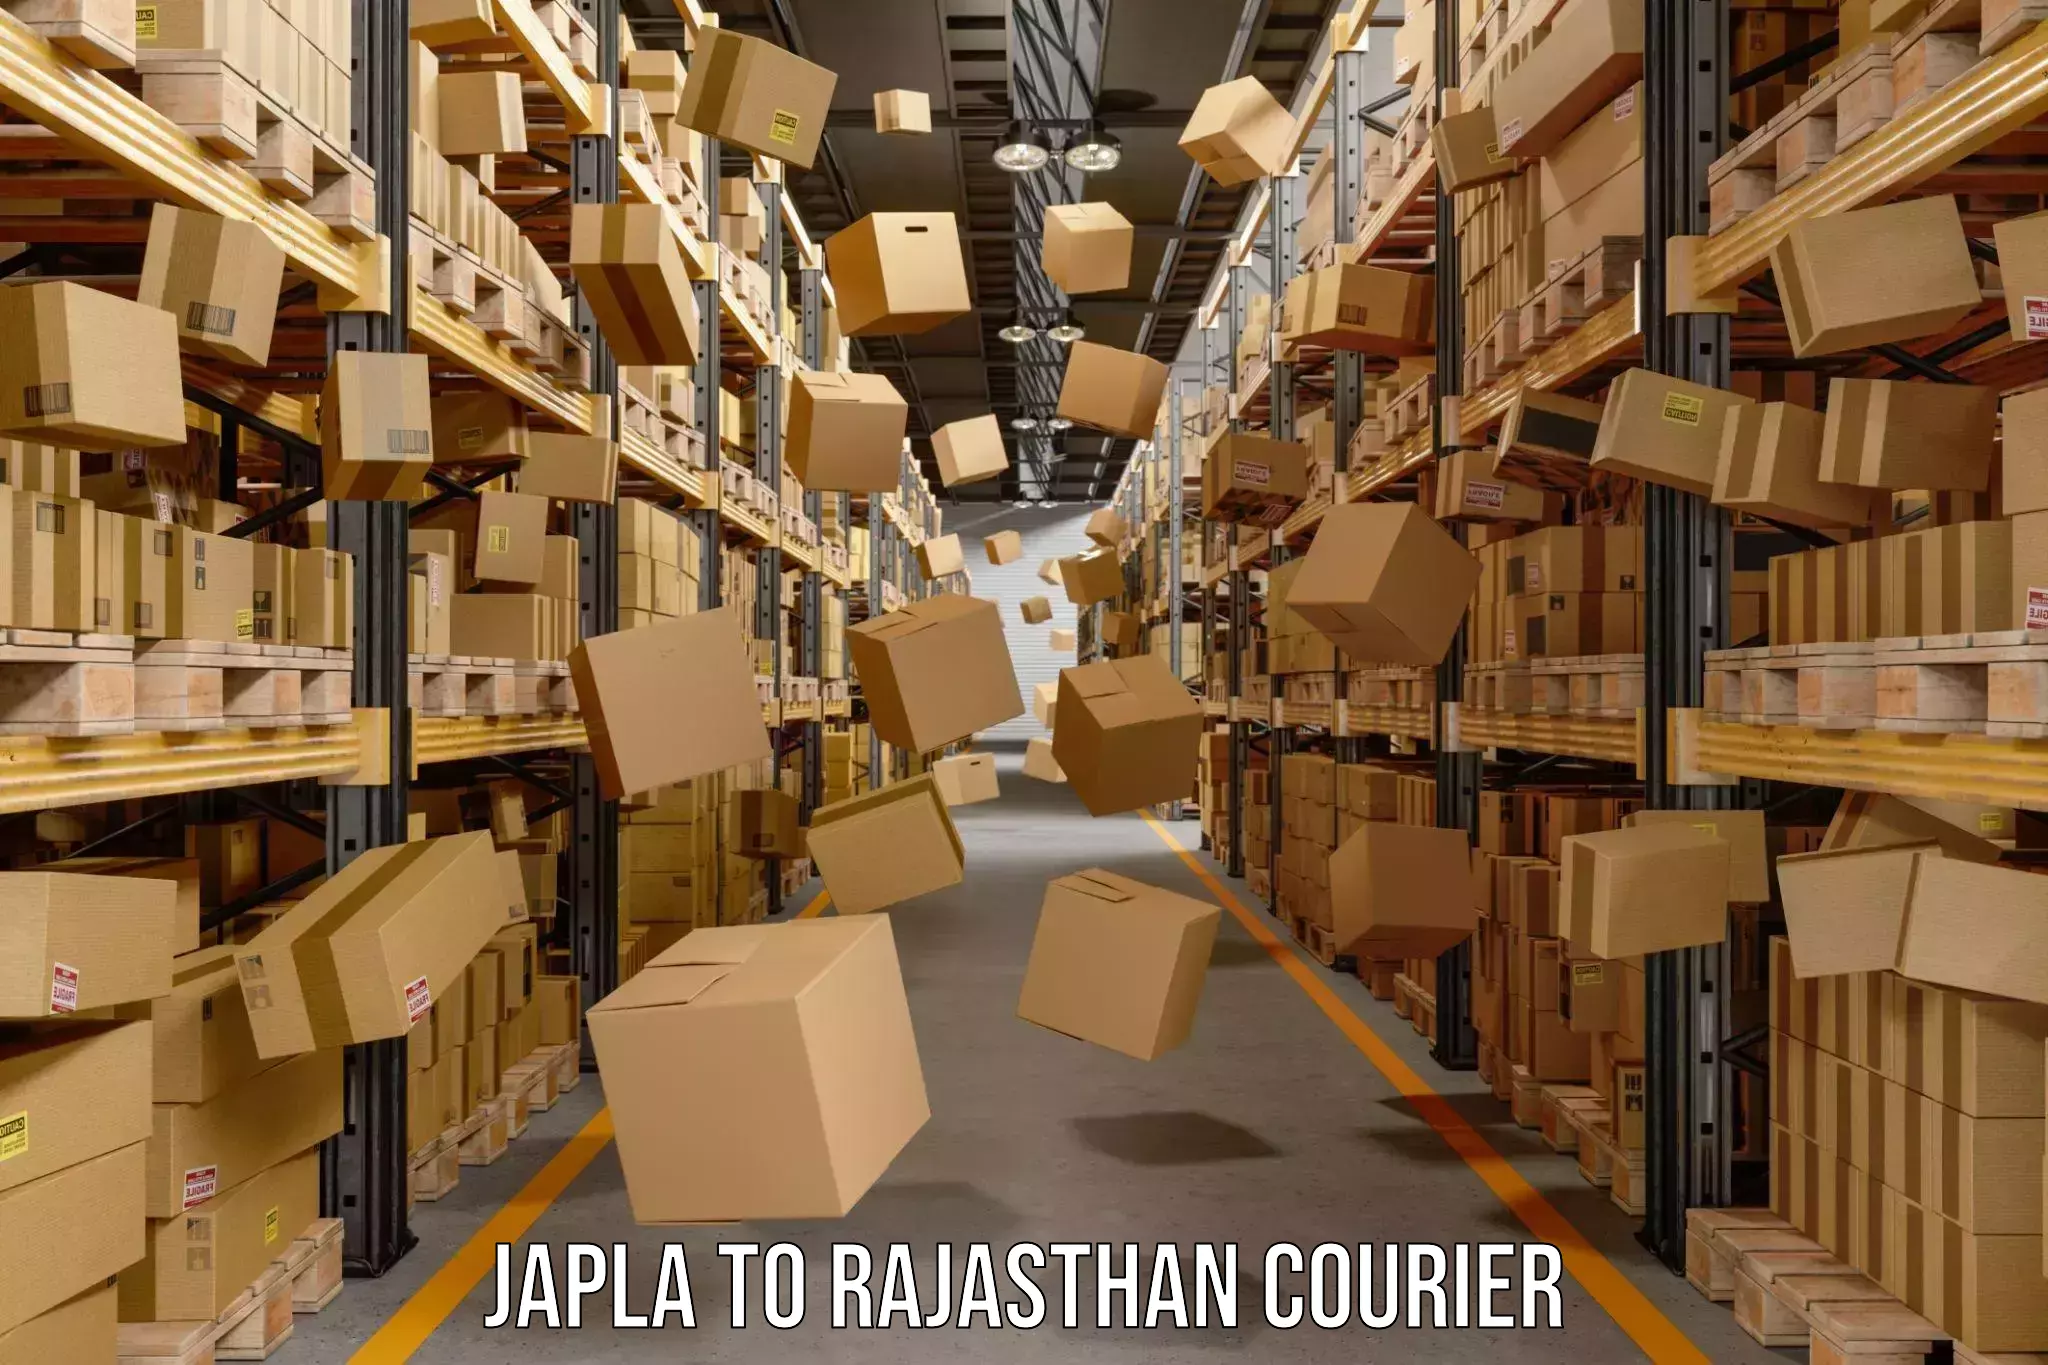 Courier service innovation Japla to Rajasthan